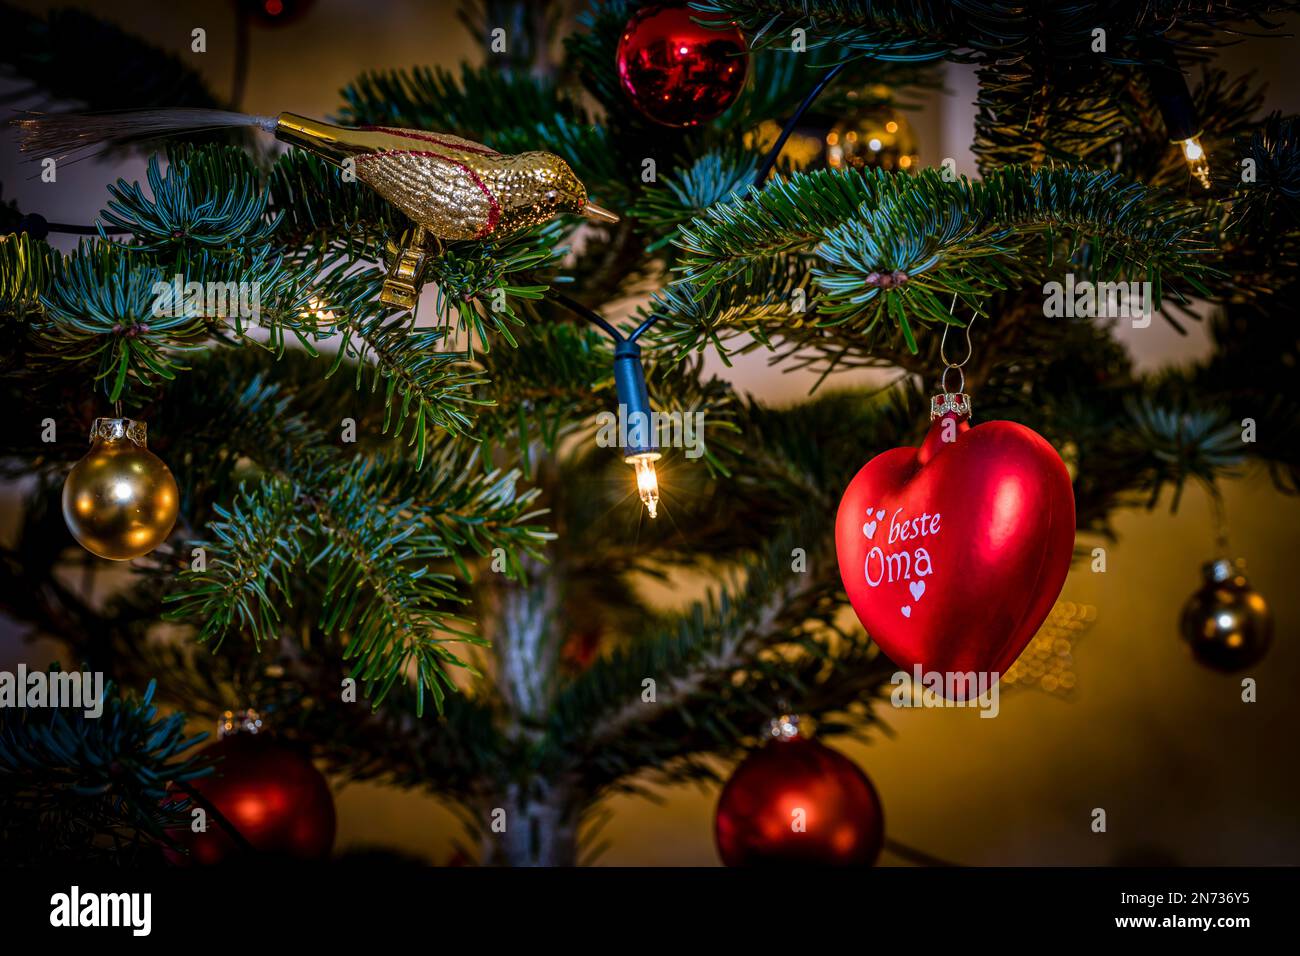 Close-ups of a decorated Christmas tree, a Nordmann fir with red and yellow balls and lighting with electric candles, a homey and festive atmosphere, Stock Photo